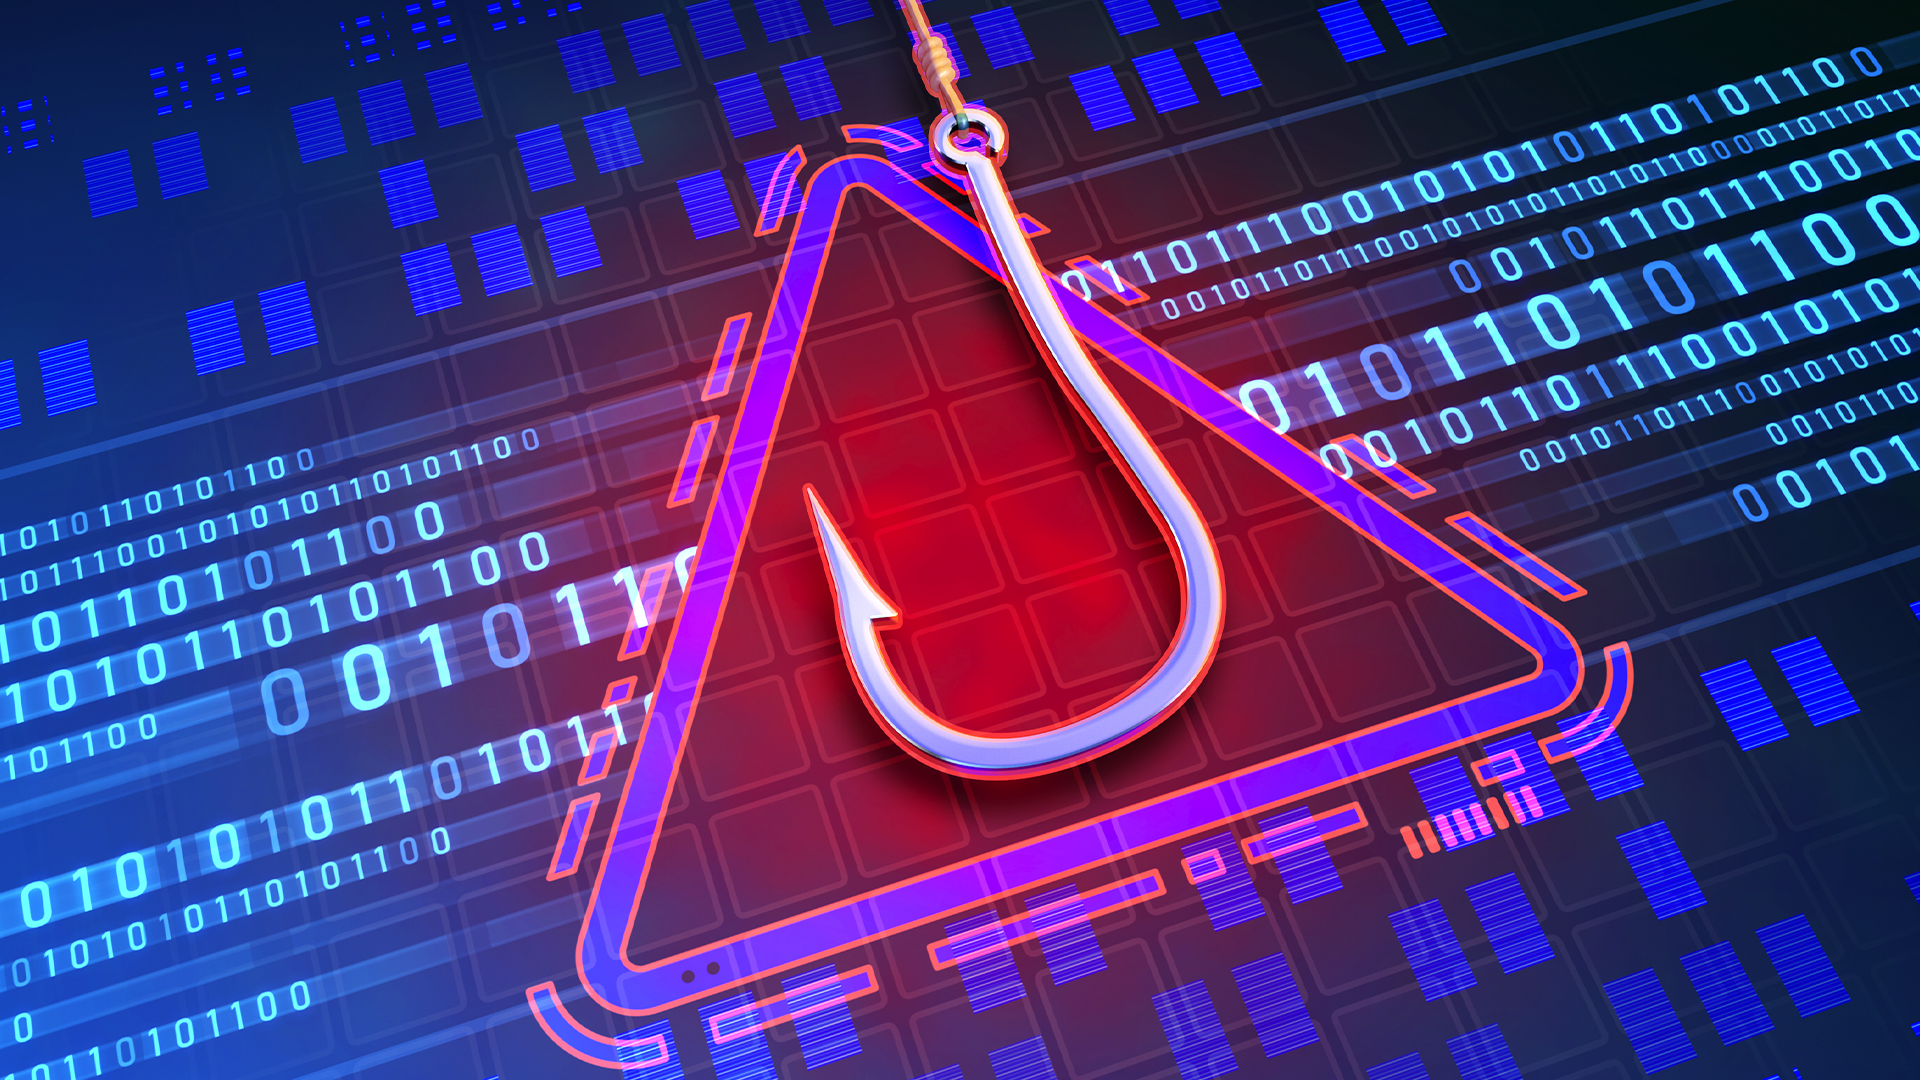 A hook representing a phishing attack on a data.